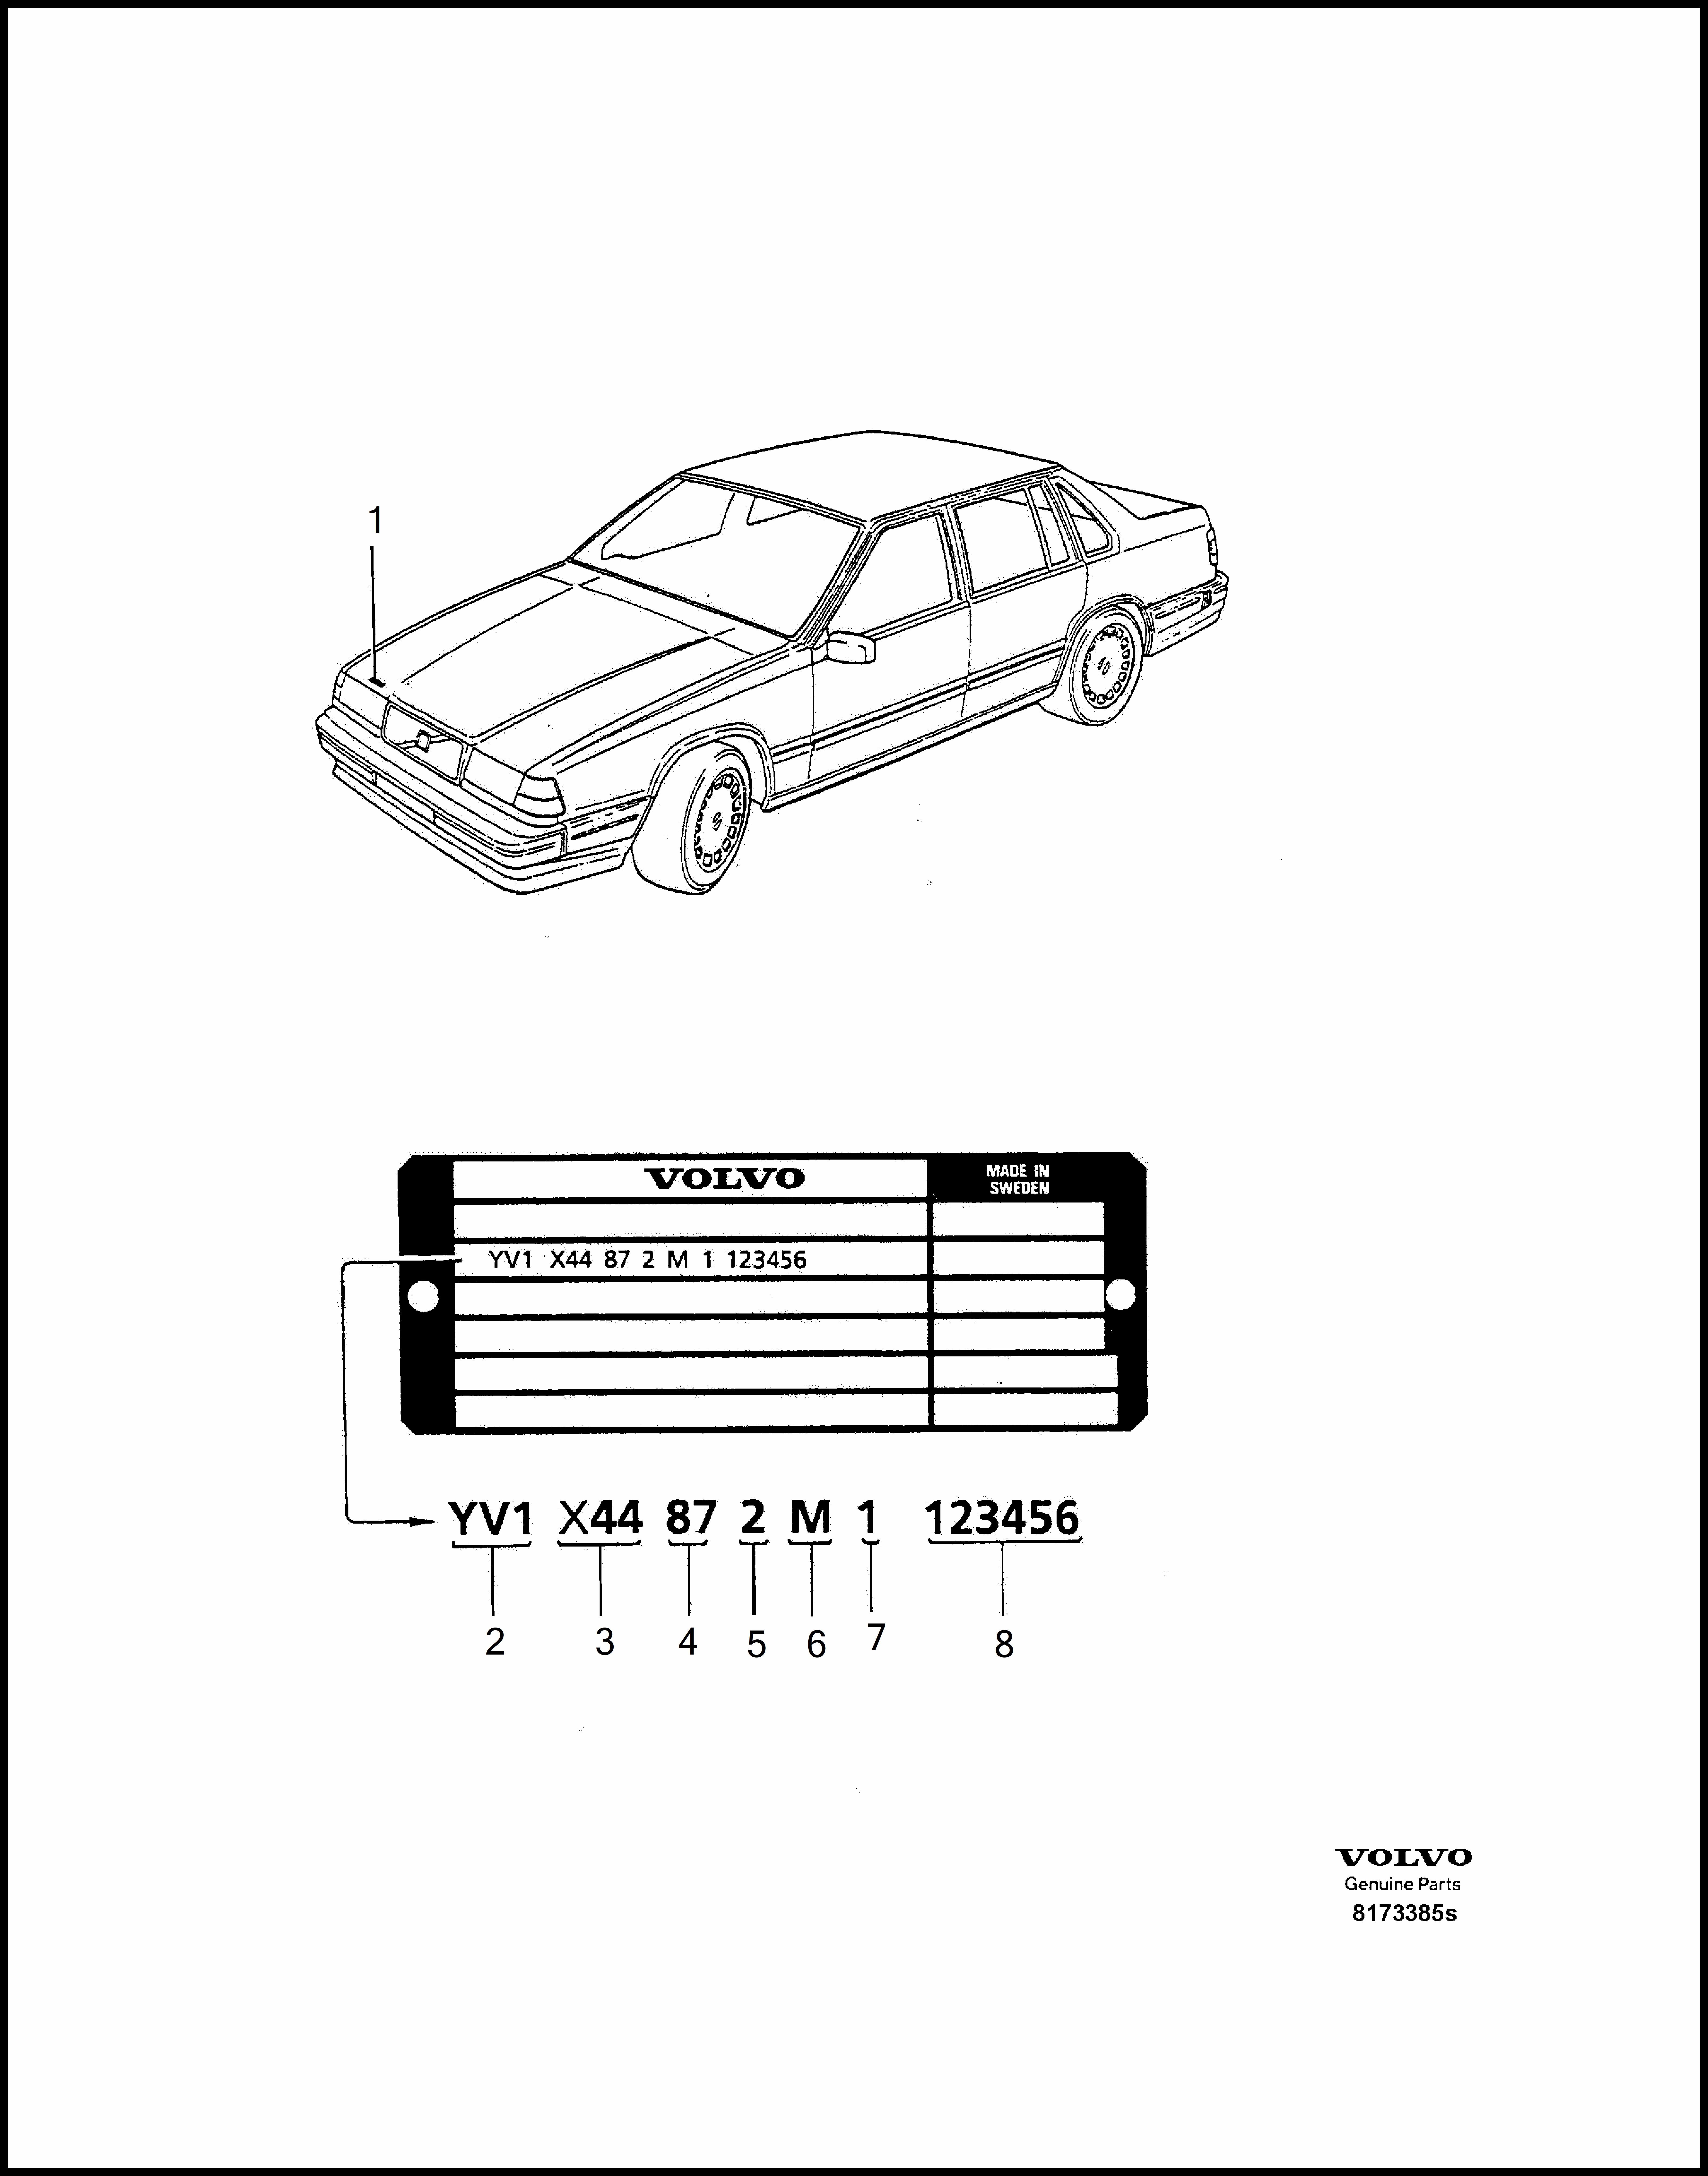 identification plate pour Volvo 940 940